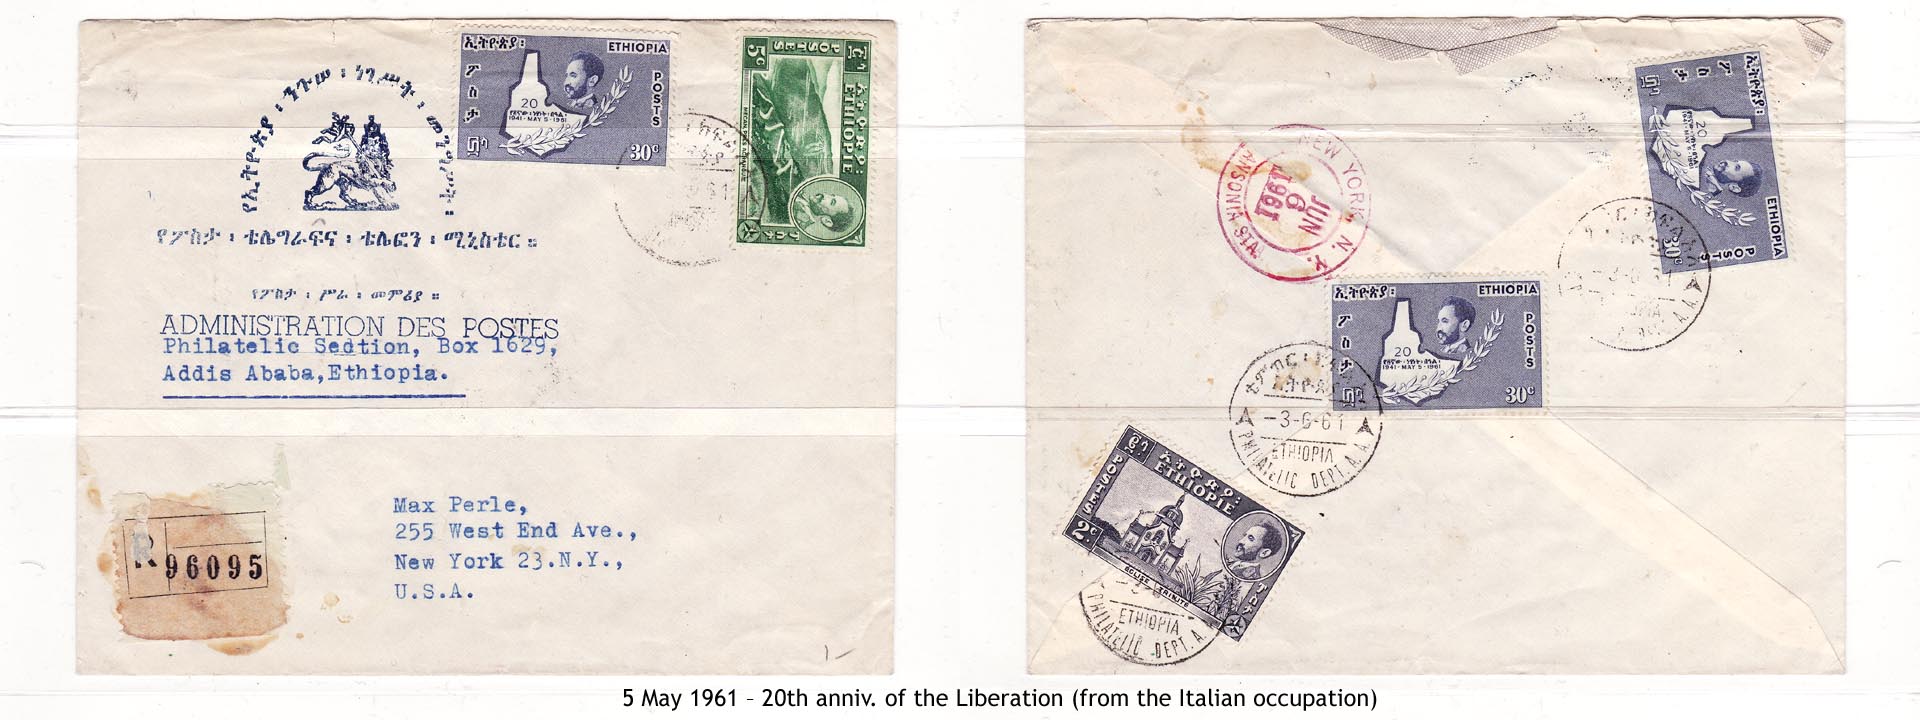 19610505 – 20th anniv. of the Liberation (from the Italian occupation)